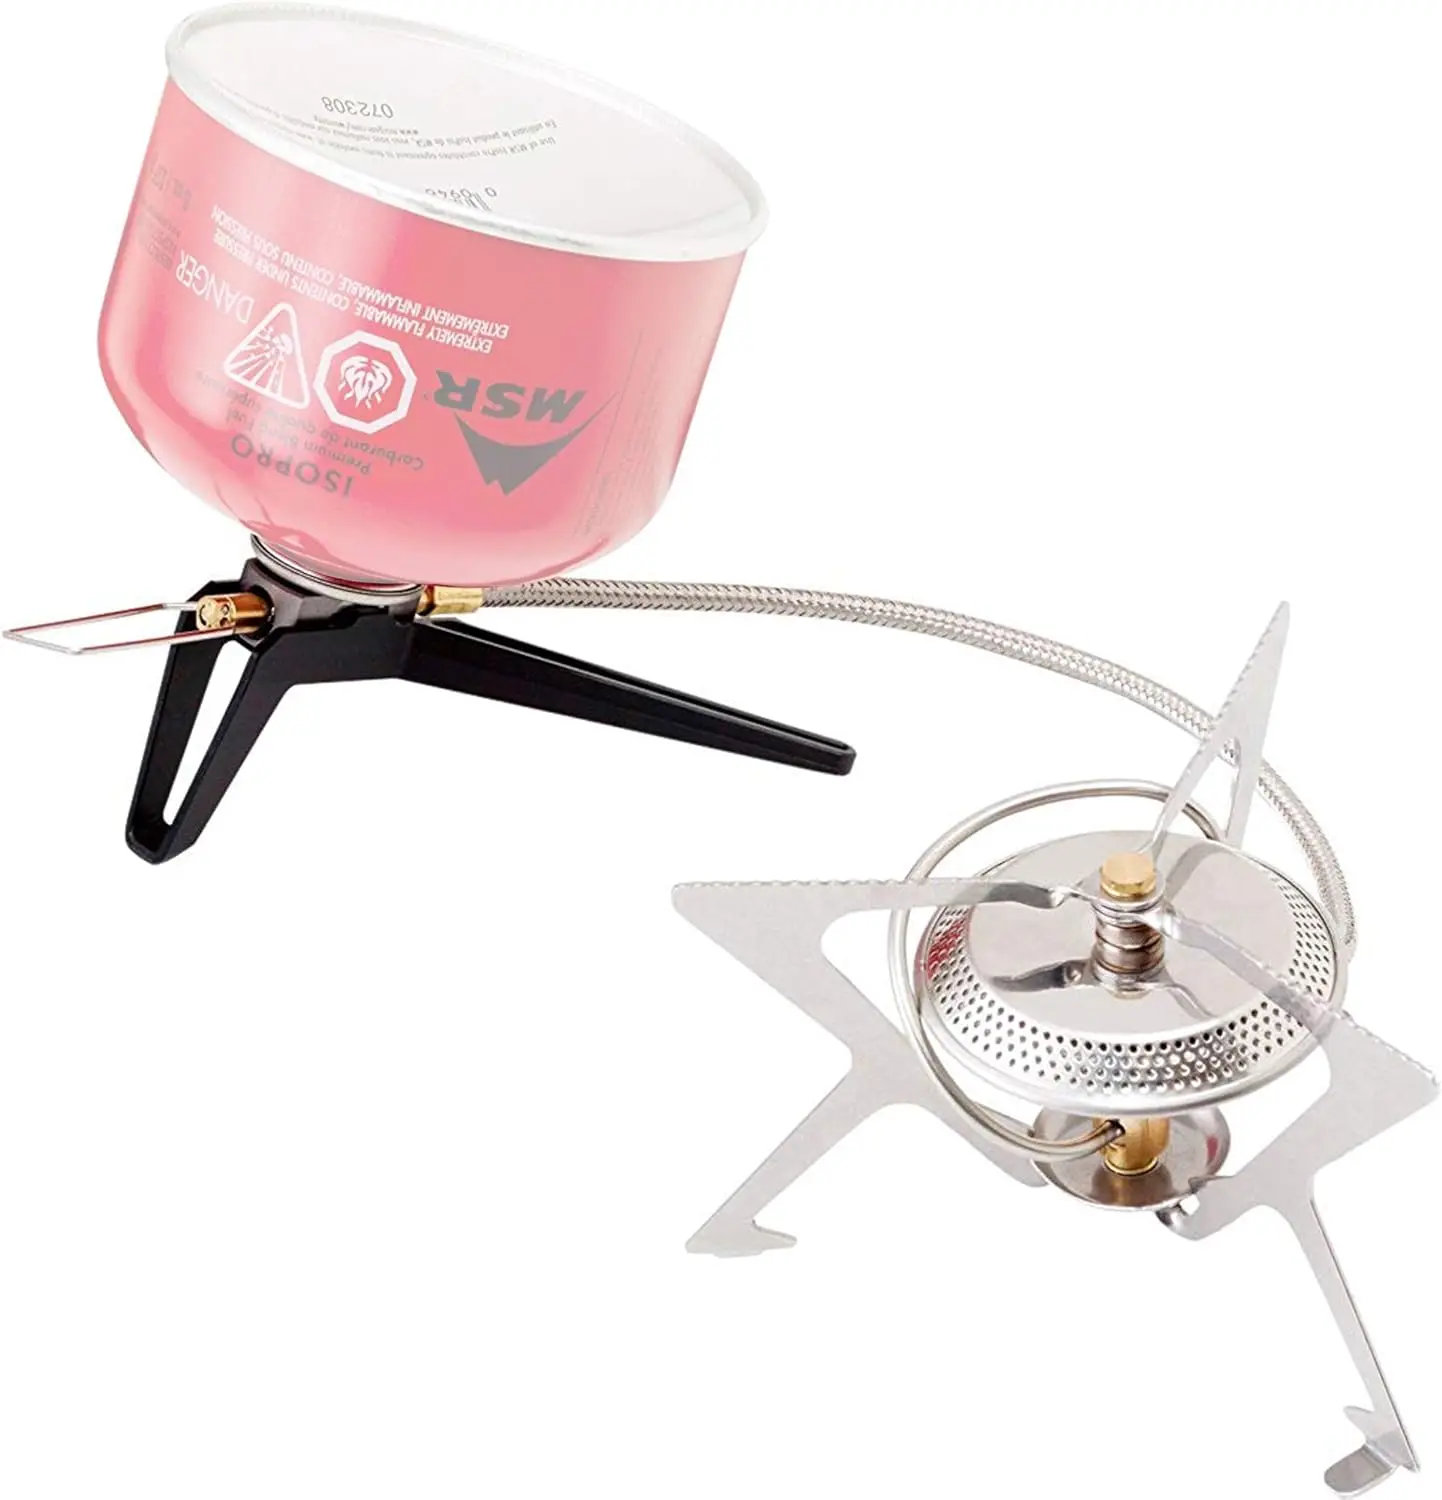 

II All-Condition Camping and Backpacking Stove